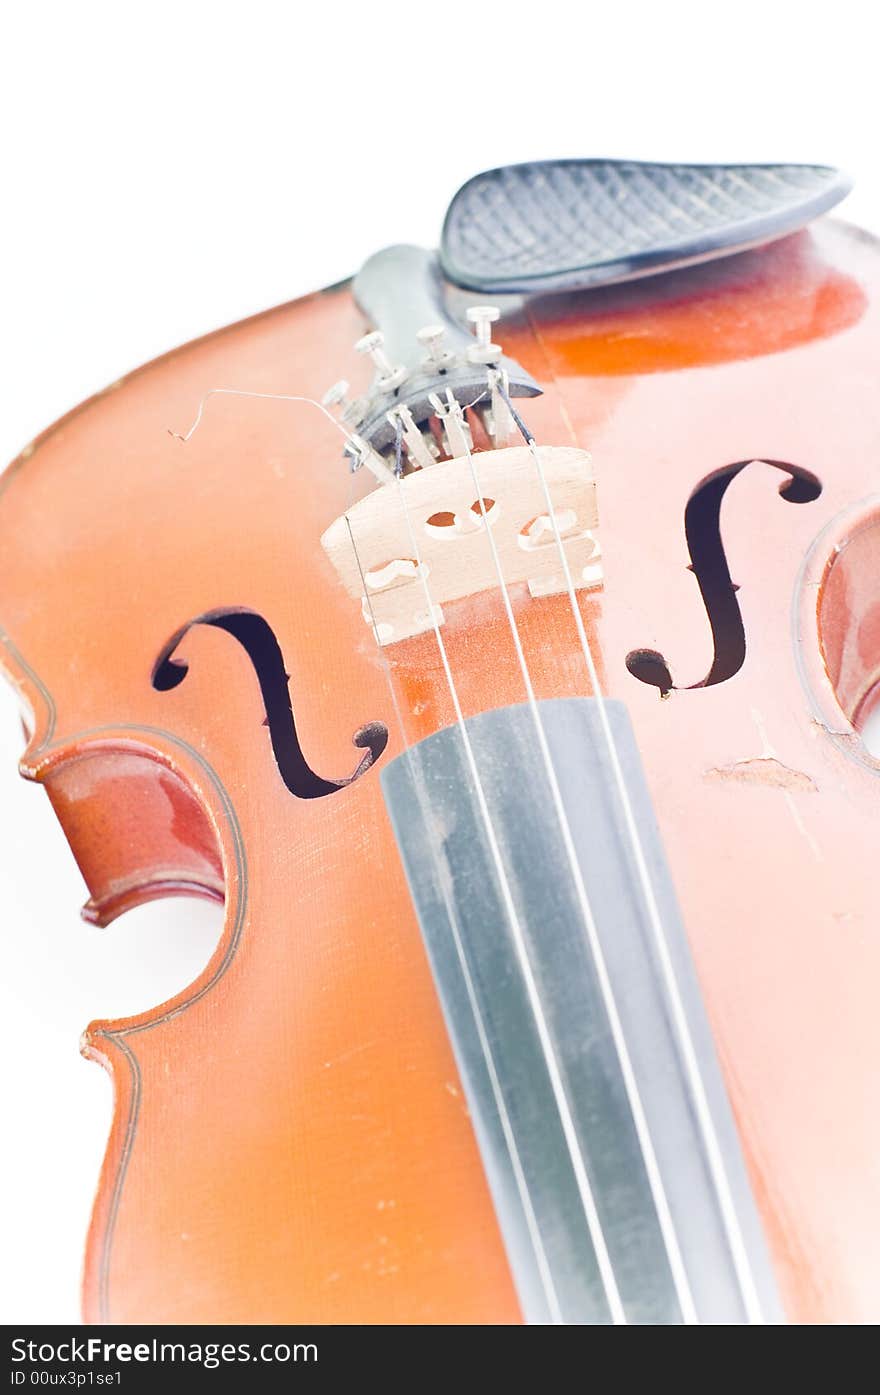 Violin details with leafs background